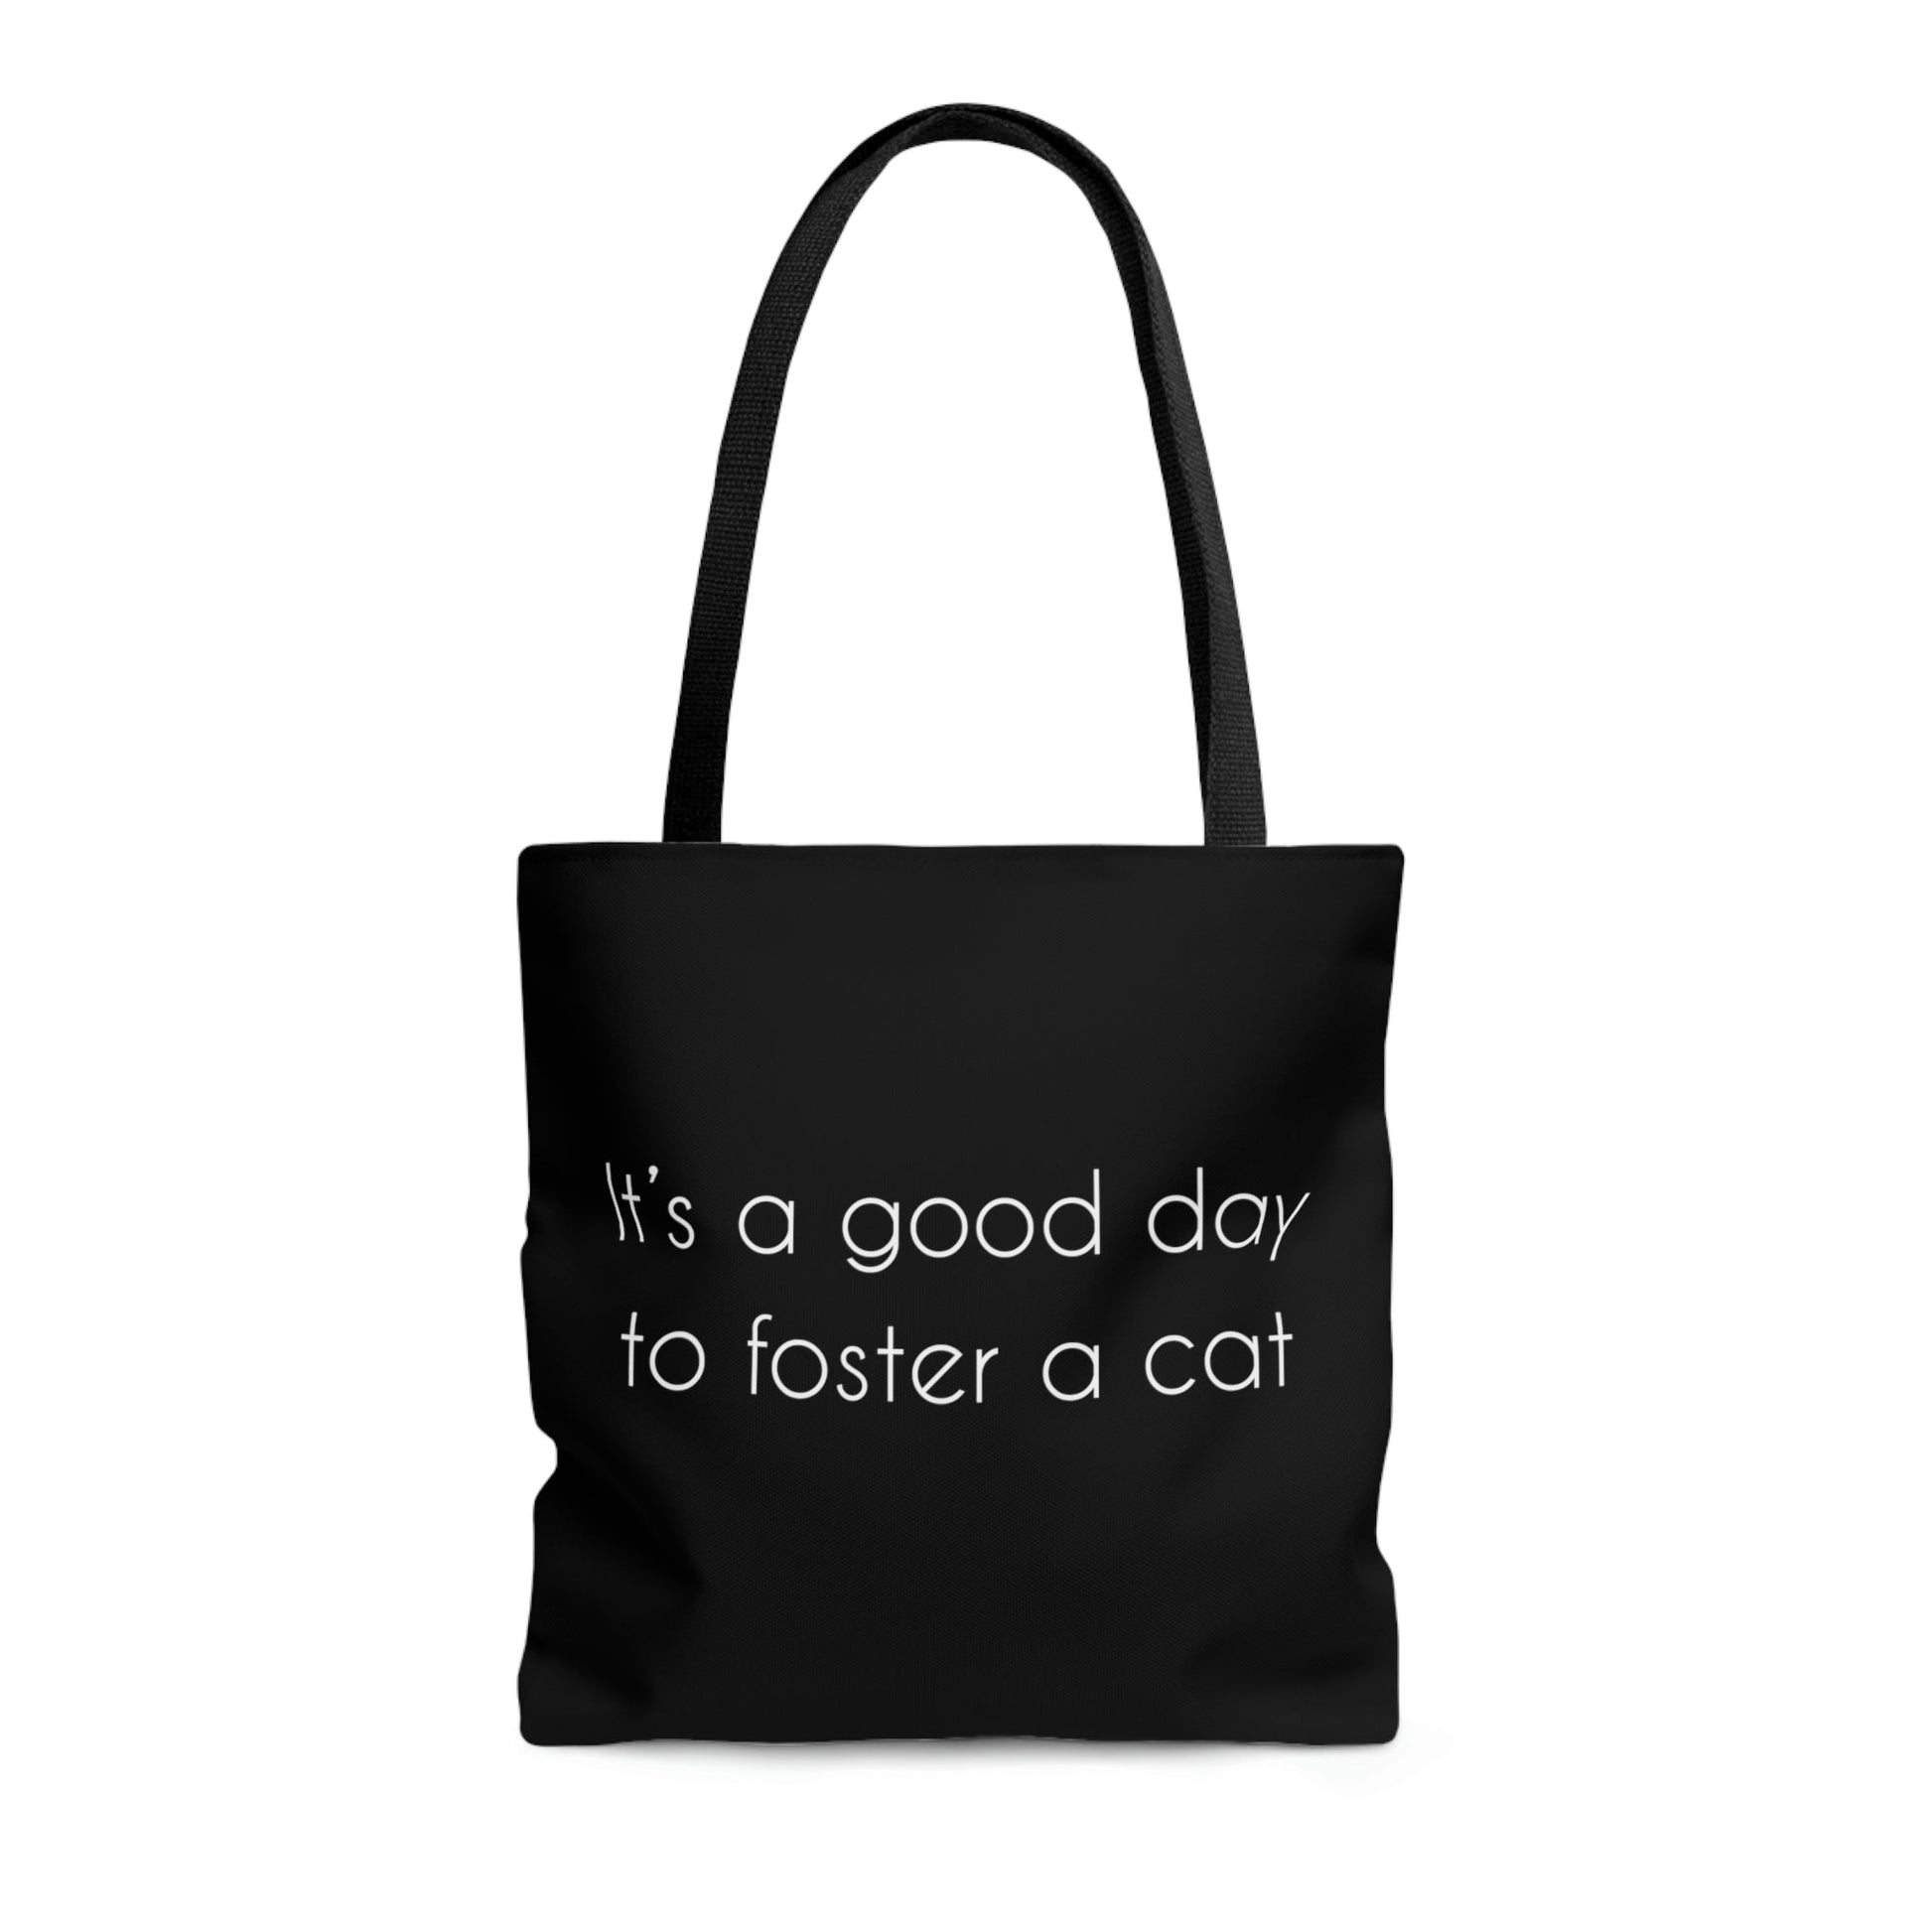 It's A Good Day To Foster A Cat | Tote Bag - Detezi Designs-25295090823839498537